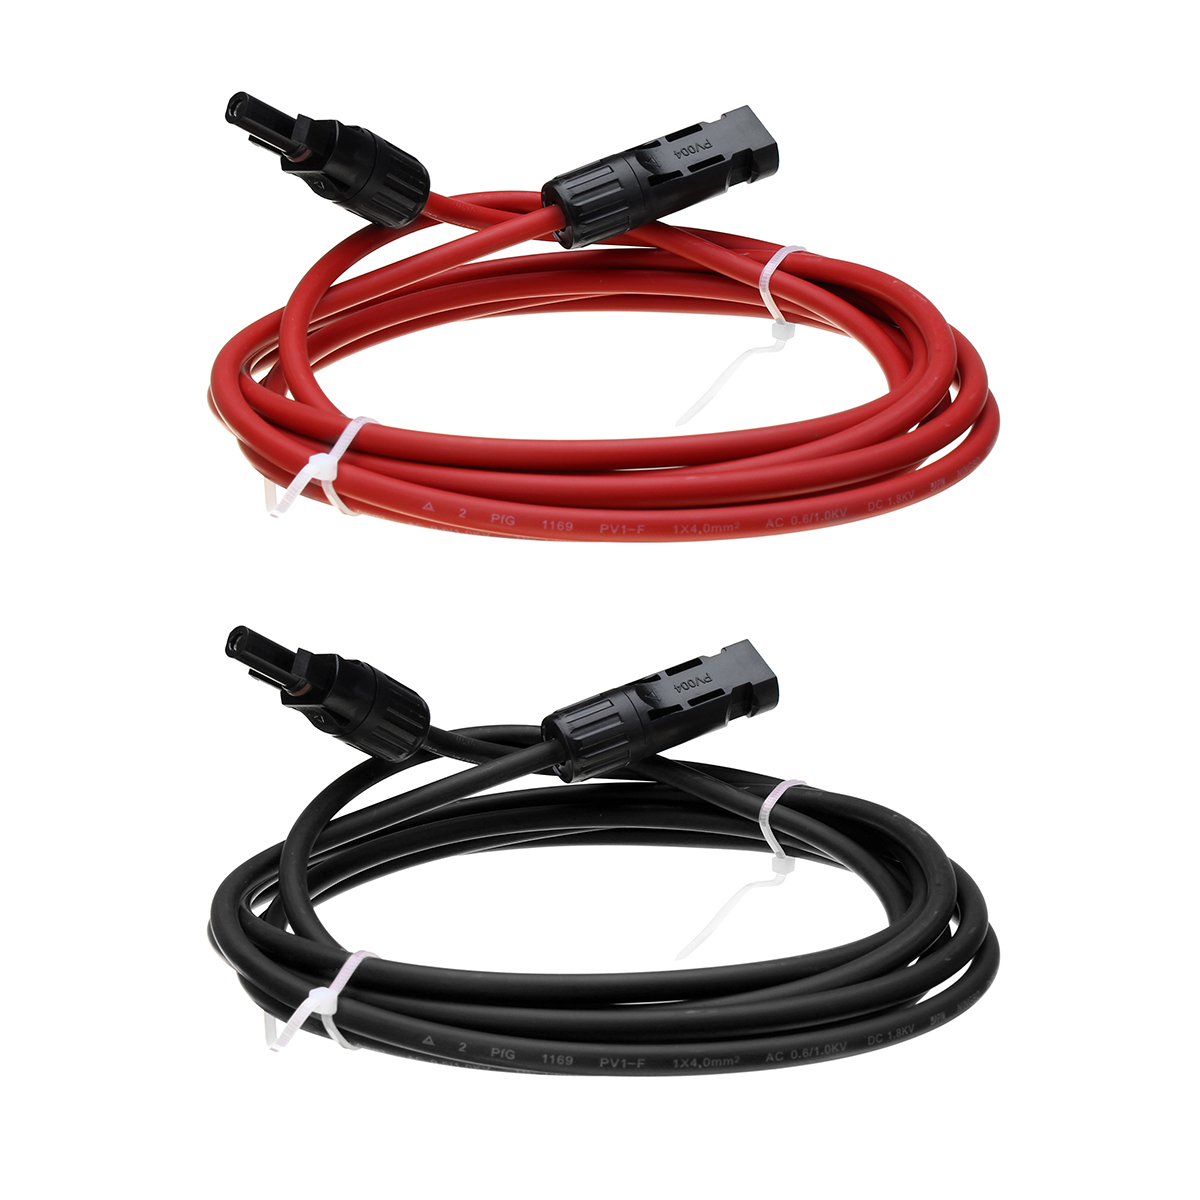 3M AWG12 Black or Red MC4 Connector Solar Panel Extension Cable Wire 85